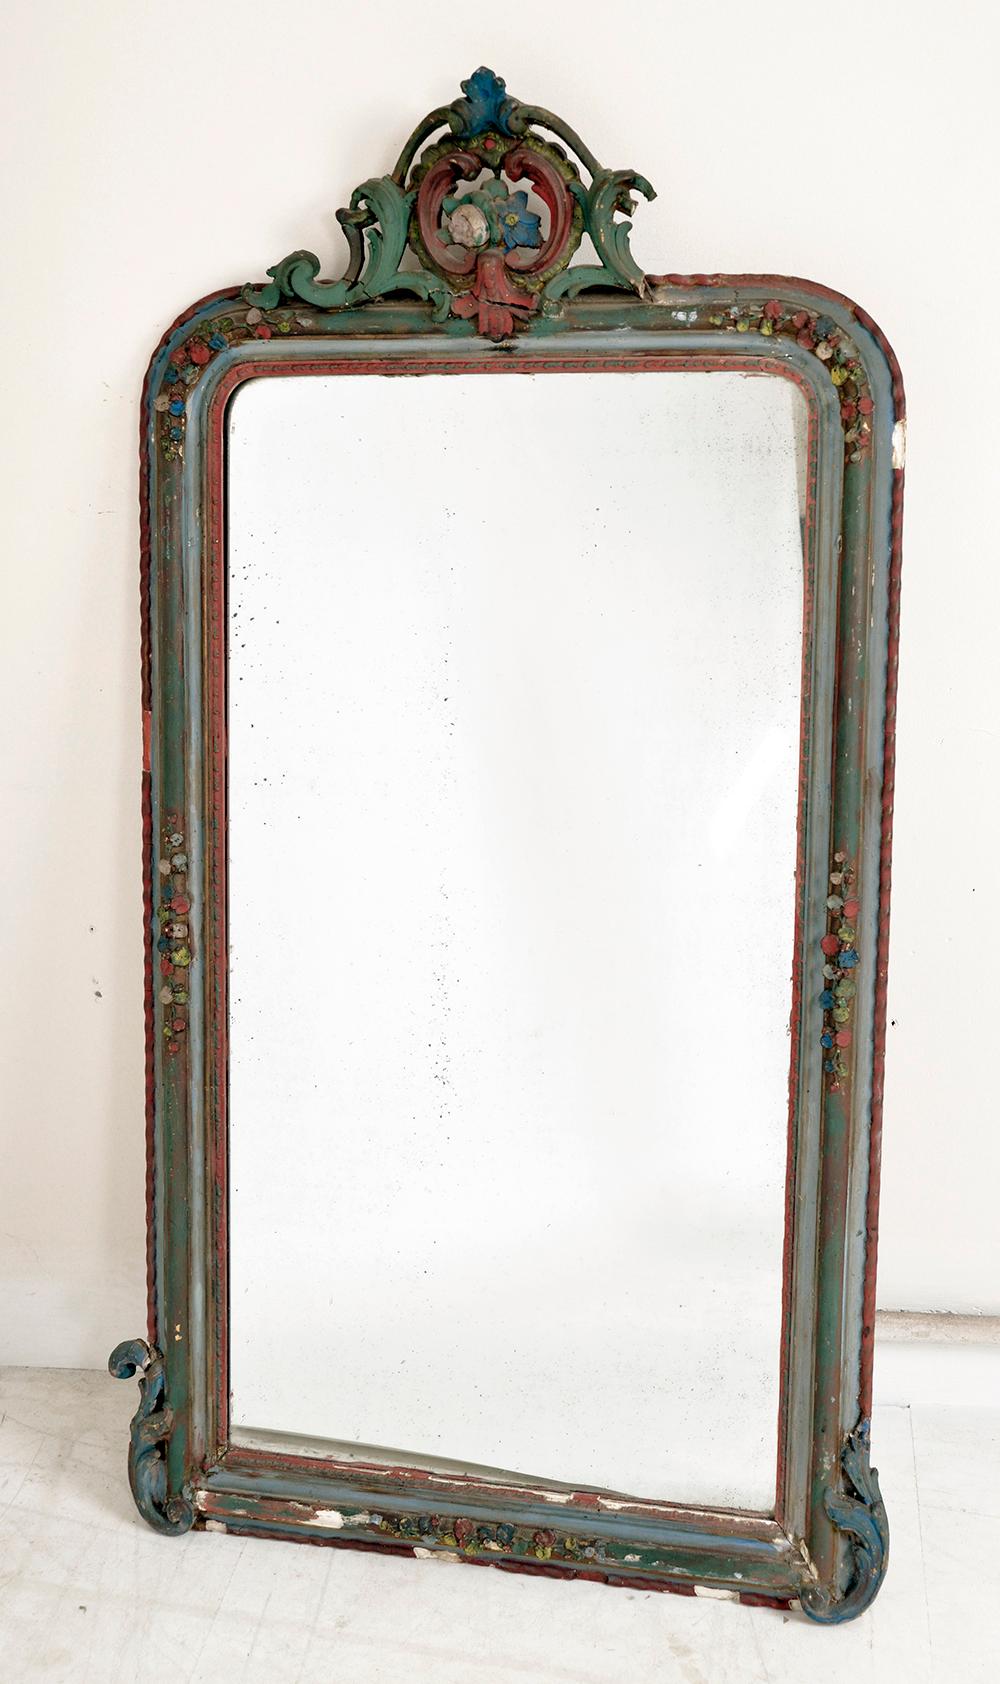 A very elegant late 19th century mirror bought in Belgium, featuring an elaborate wood and plasterwork surround with faded paint wood finish, and a desirable, lightly foxed glass mirror with a bright reflection. 
The floral crest is made from wire